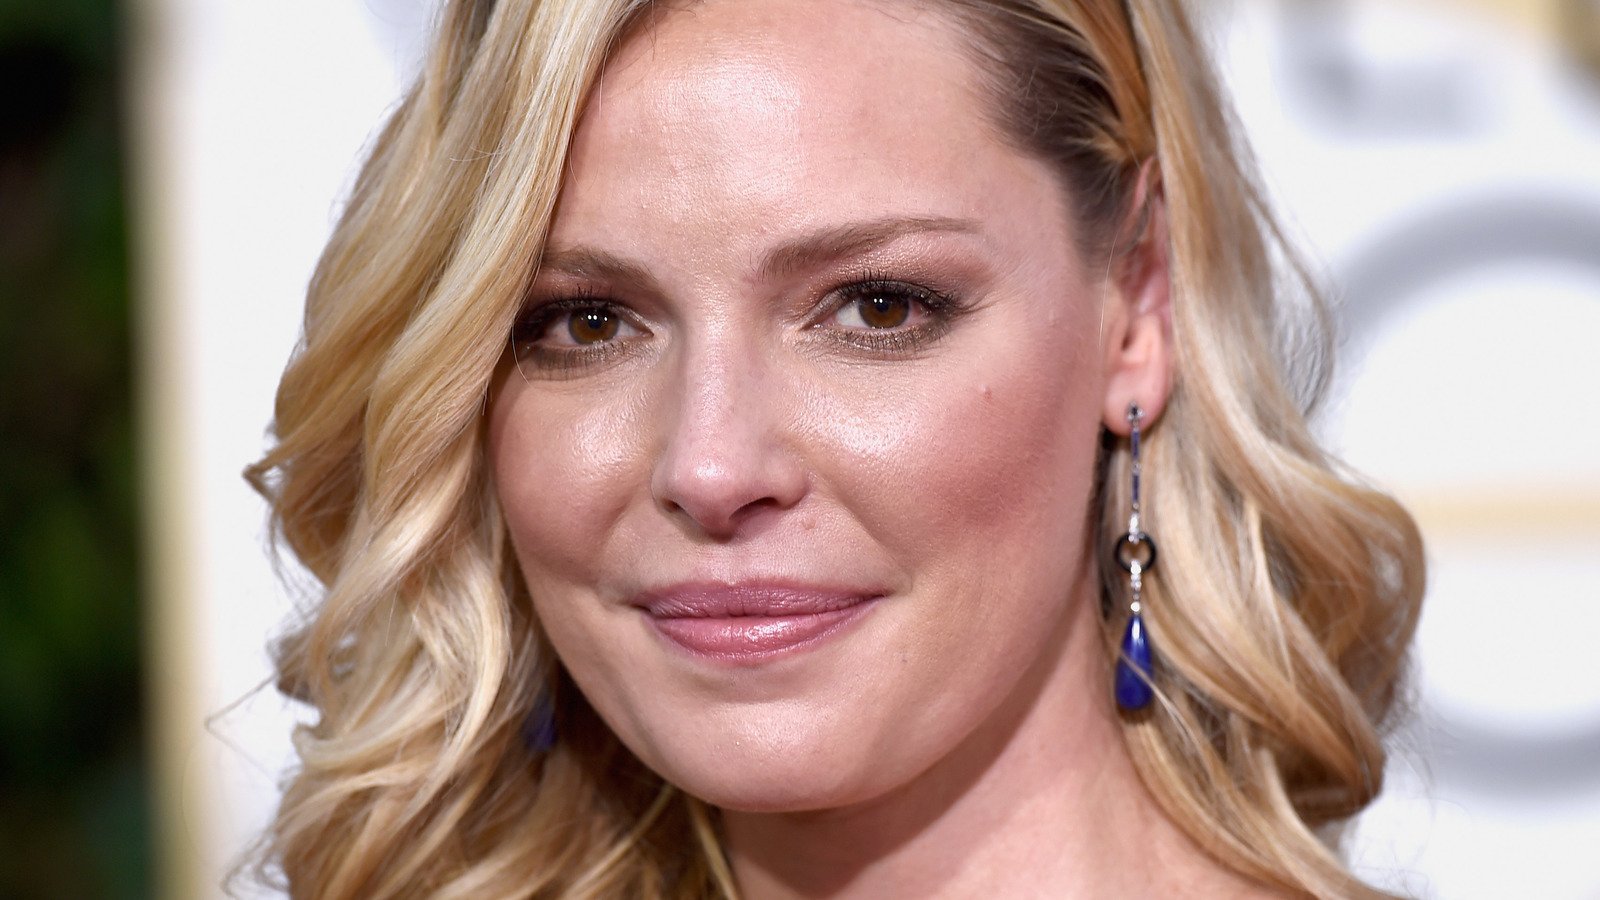 The Truth About Katherine Heigl's Battle With Anxiety